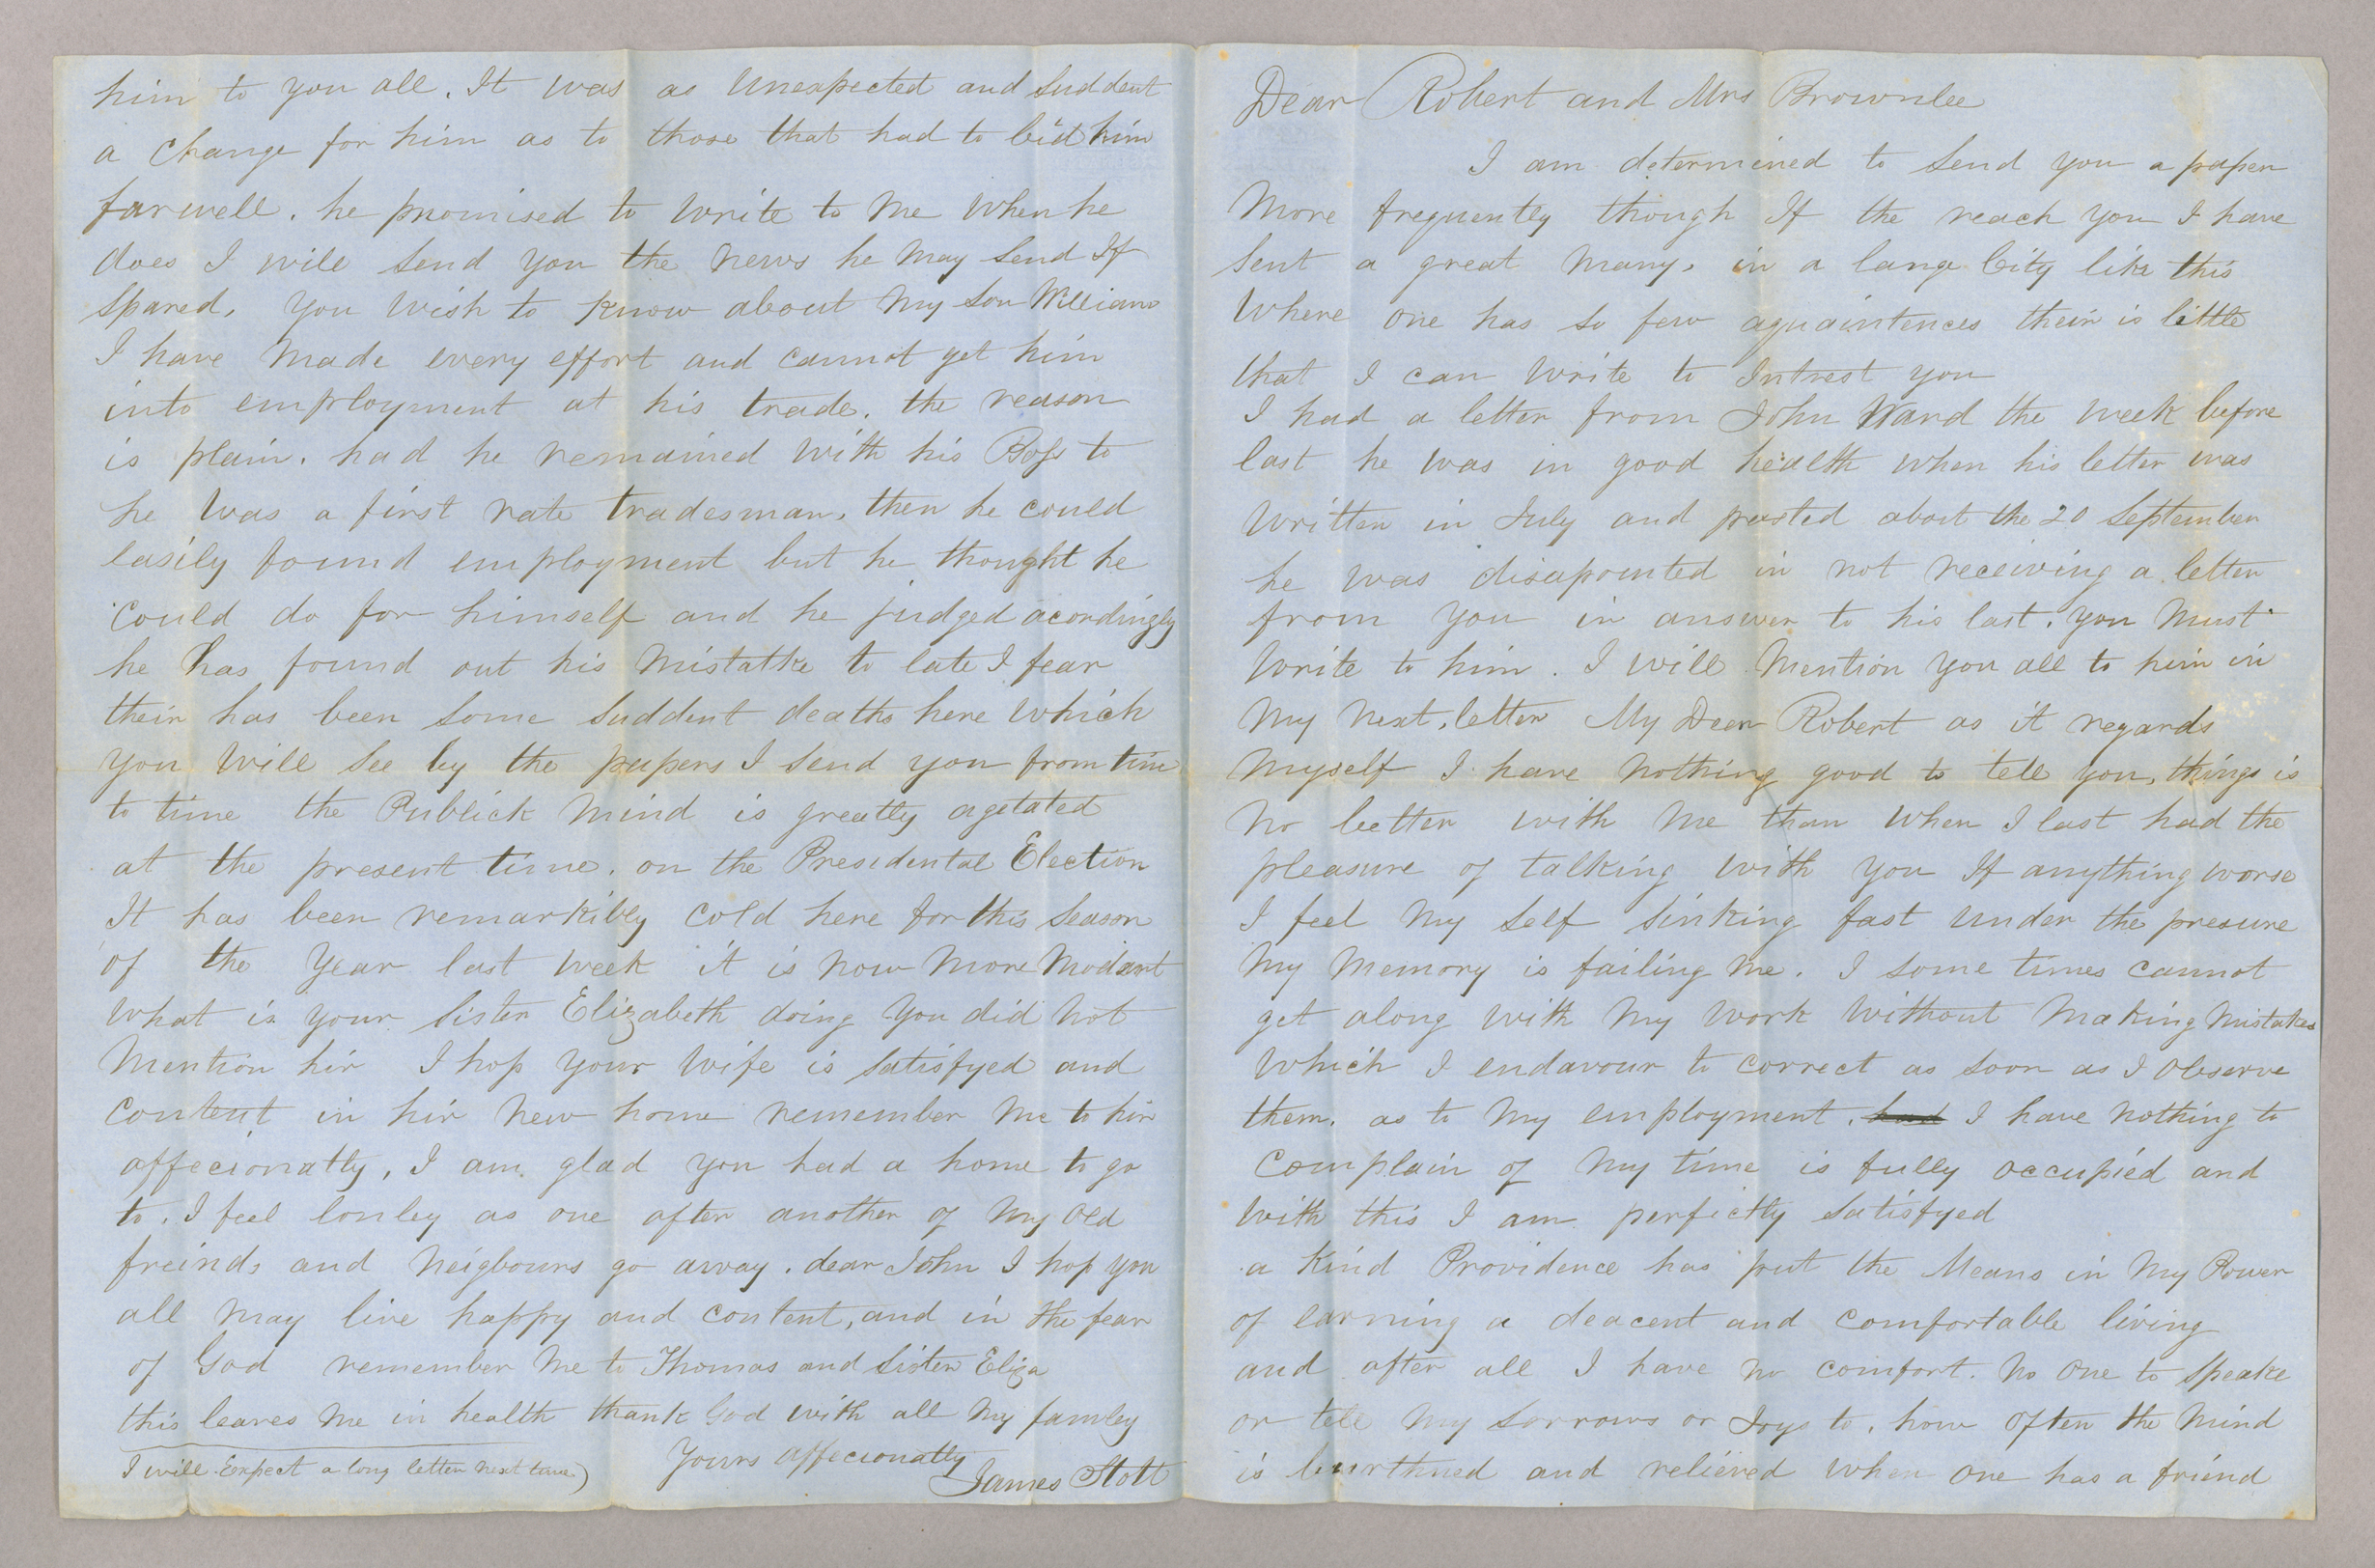 Letter. James Stott, New York, New York, to "Dear John" [John E. Brownlee], n. p., Page 2, and "Dear Robert and Mrs. Brownlee", n. p., Page 1